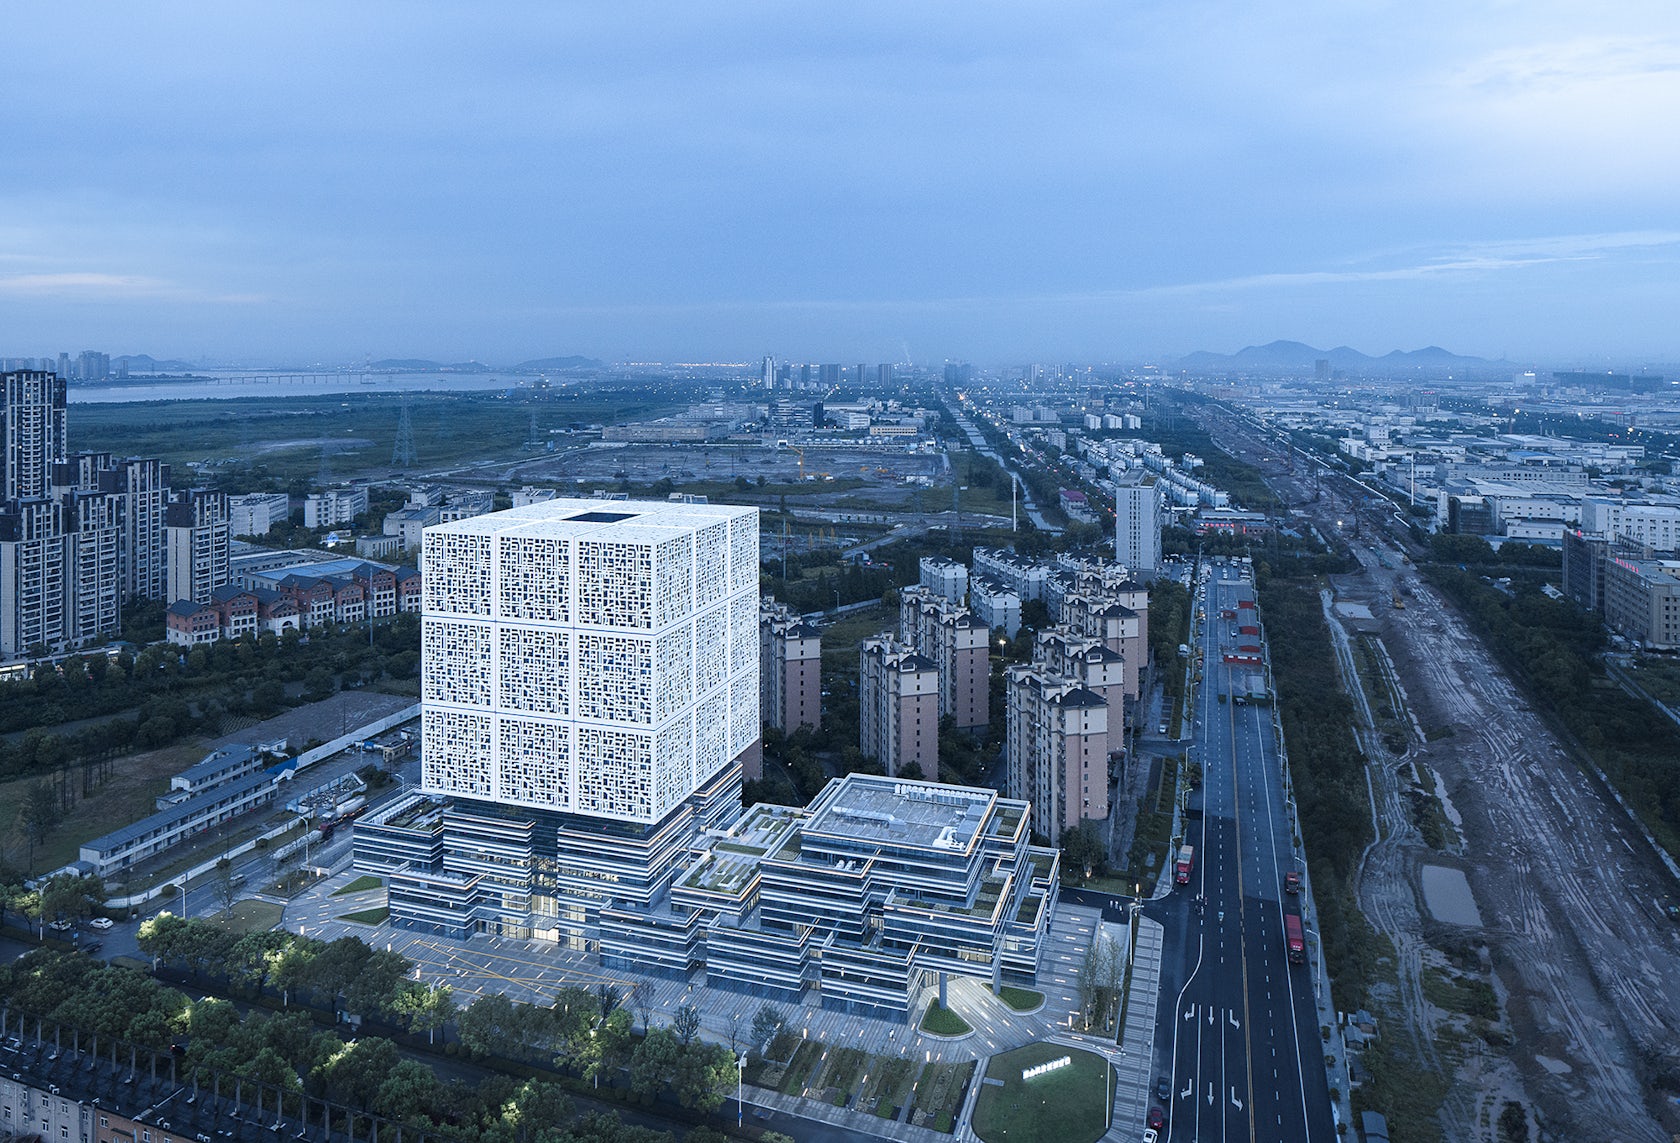 © The Architectural Design & Research Institute of Zhejiang University Co., Ltd.